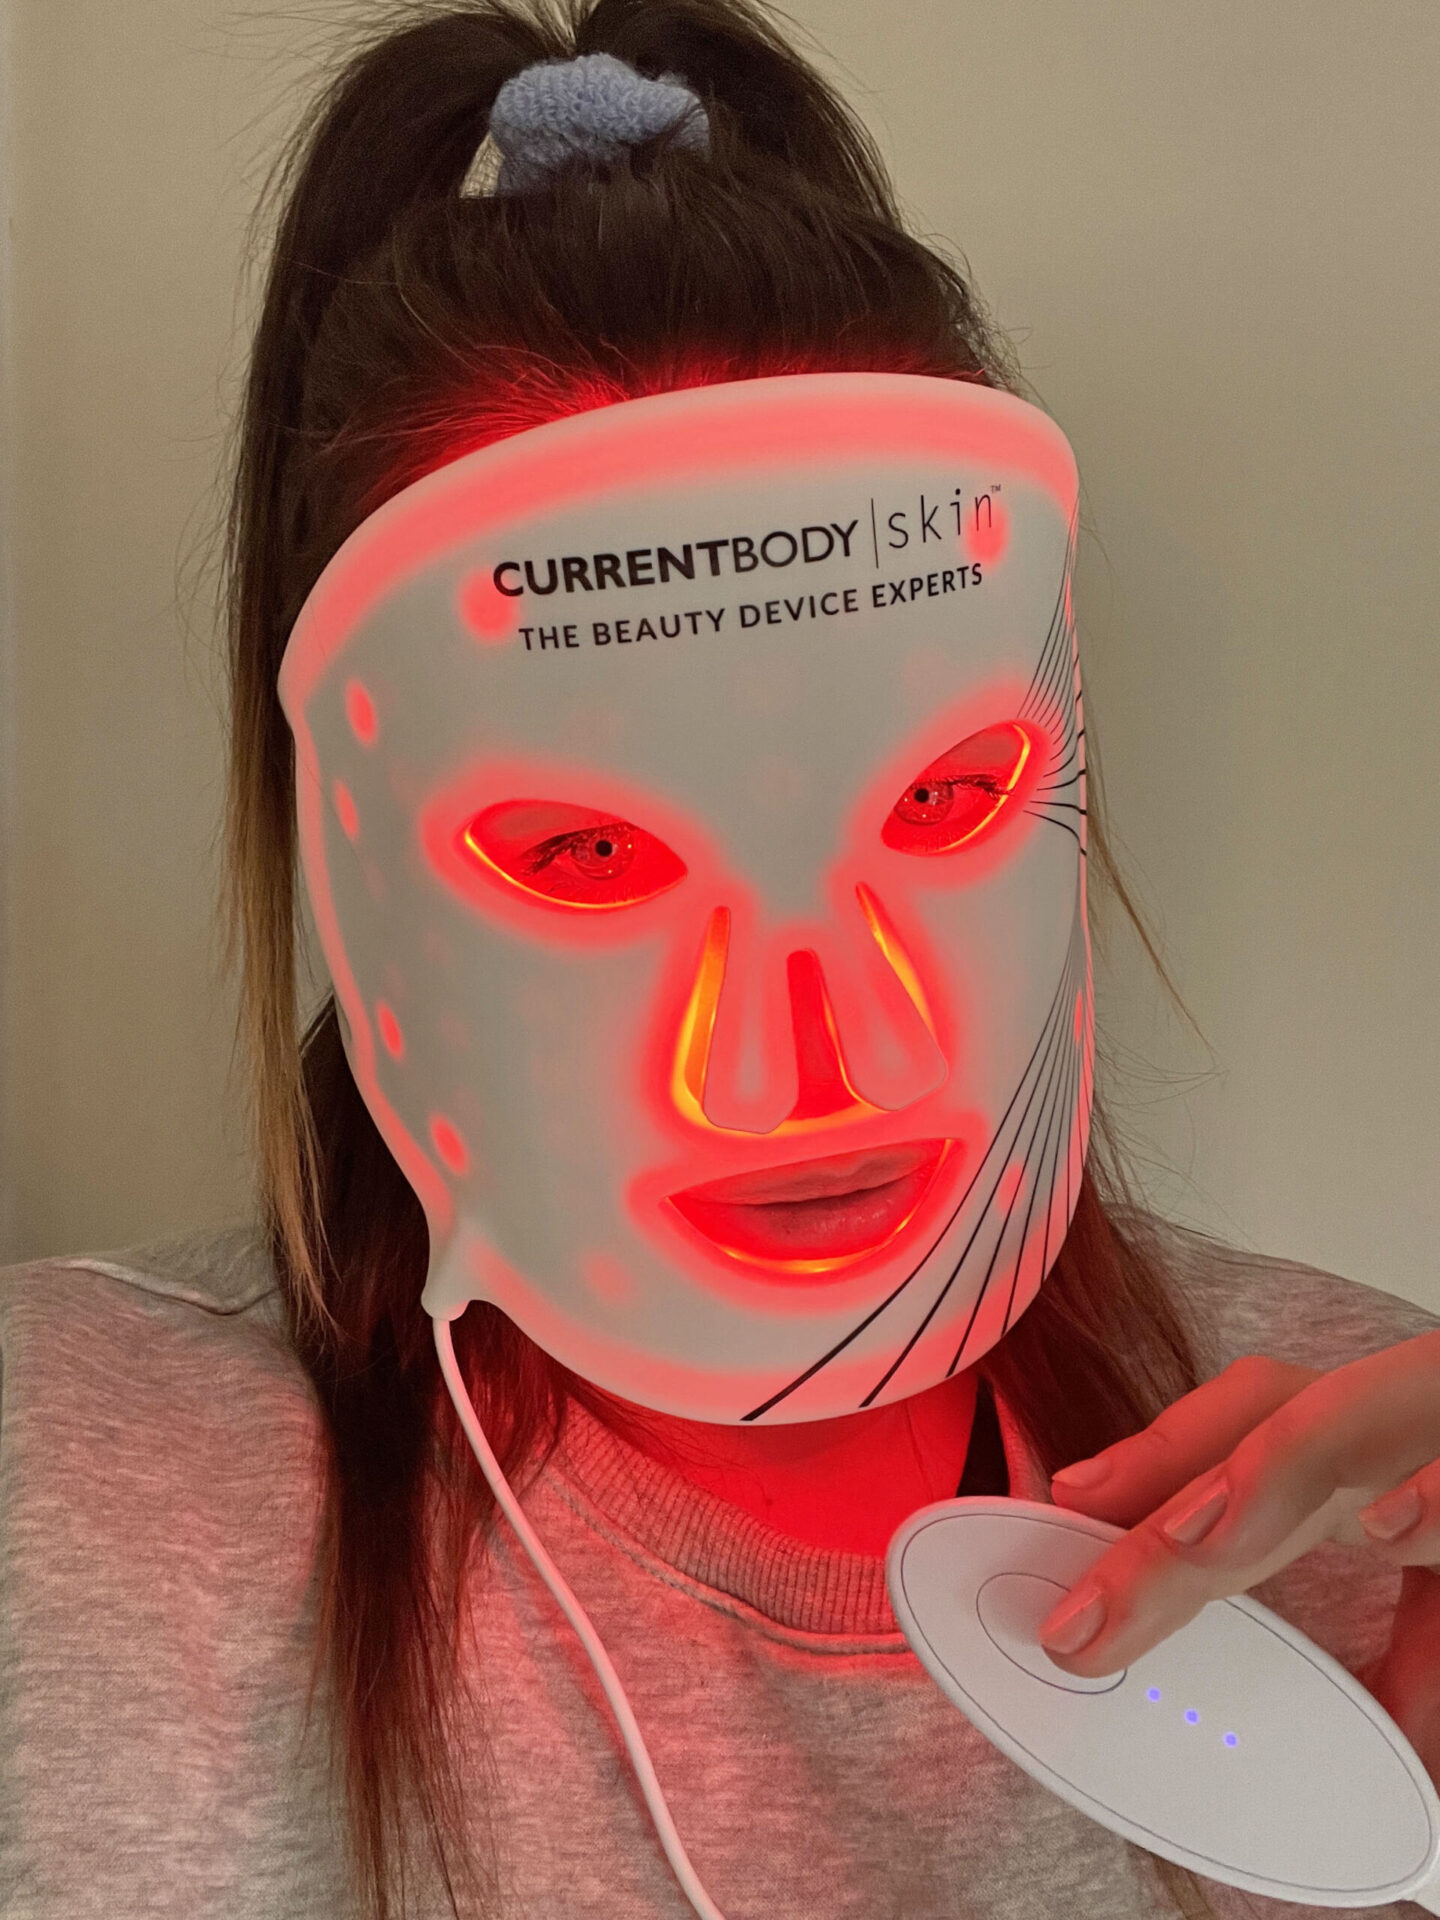 currentbody skin LED light therapy mask review before and after